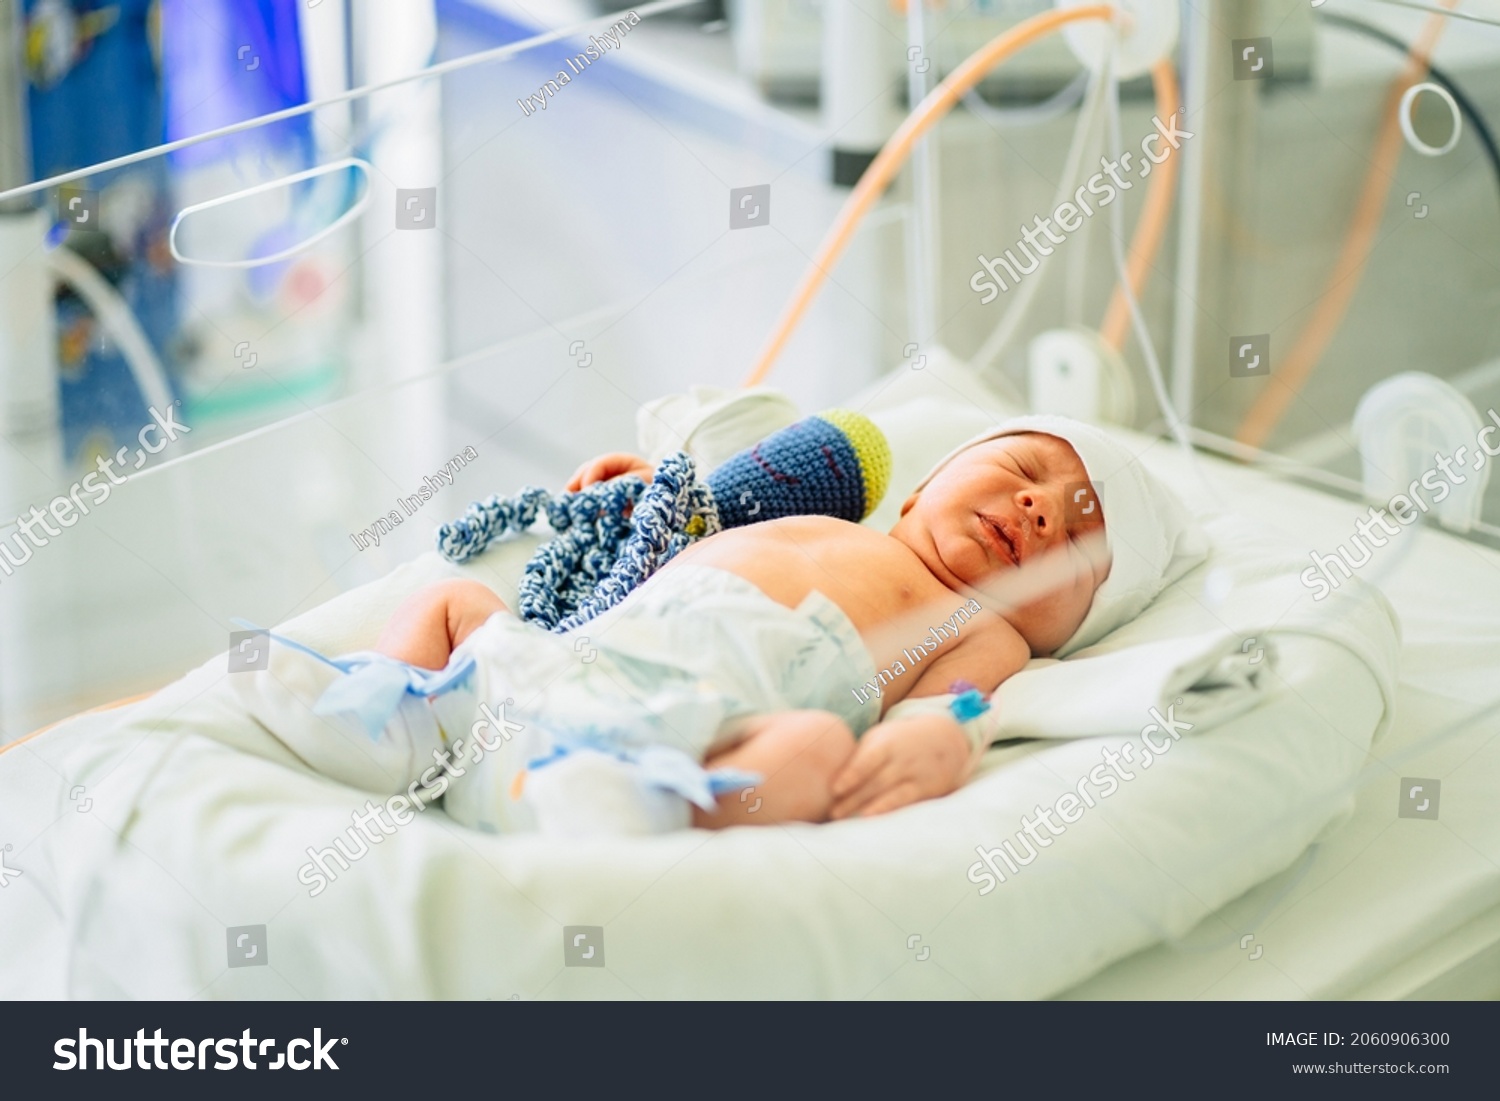 Two-day-old newborn baby boy in intensive care unit in a medical incubator. Newborn rescue concept. The work of resuscitation doctors. Photo indoors. #2060906300